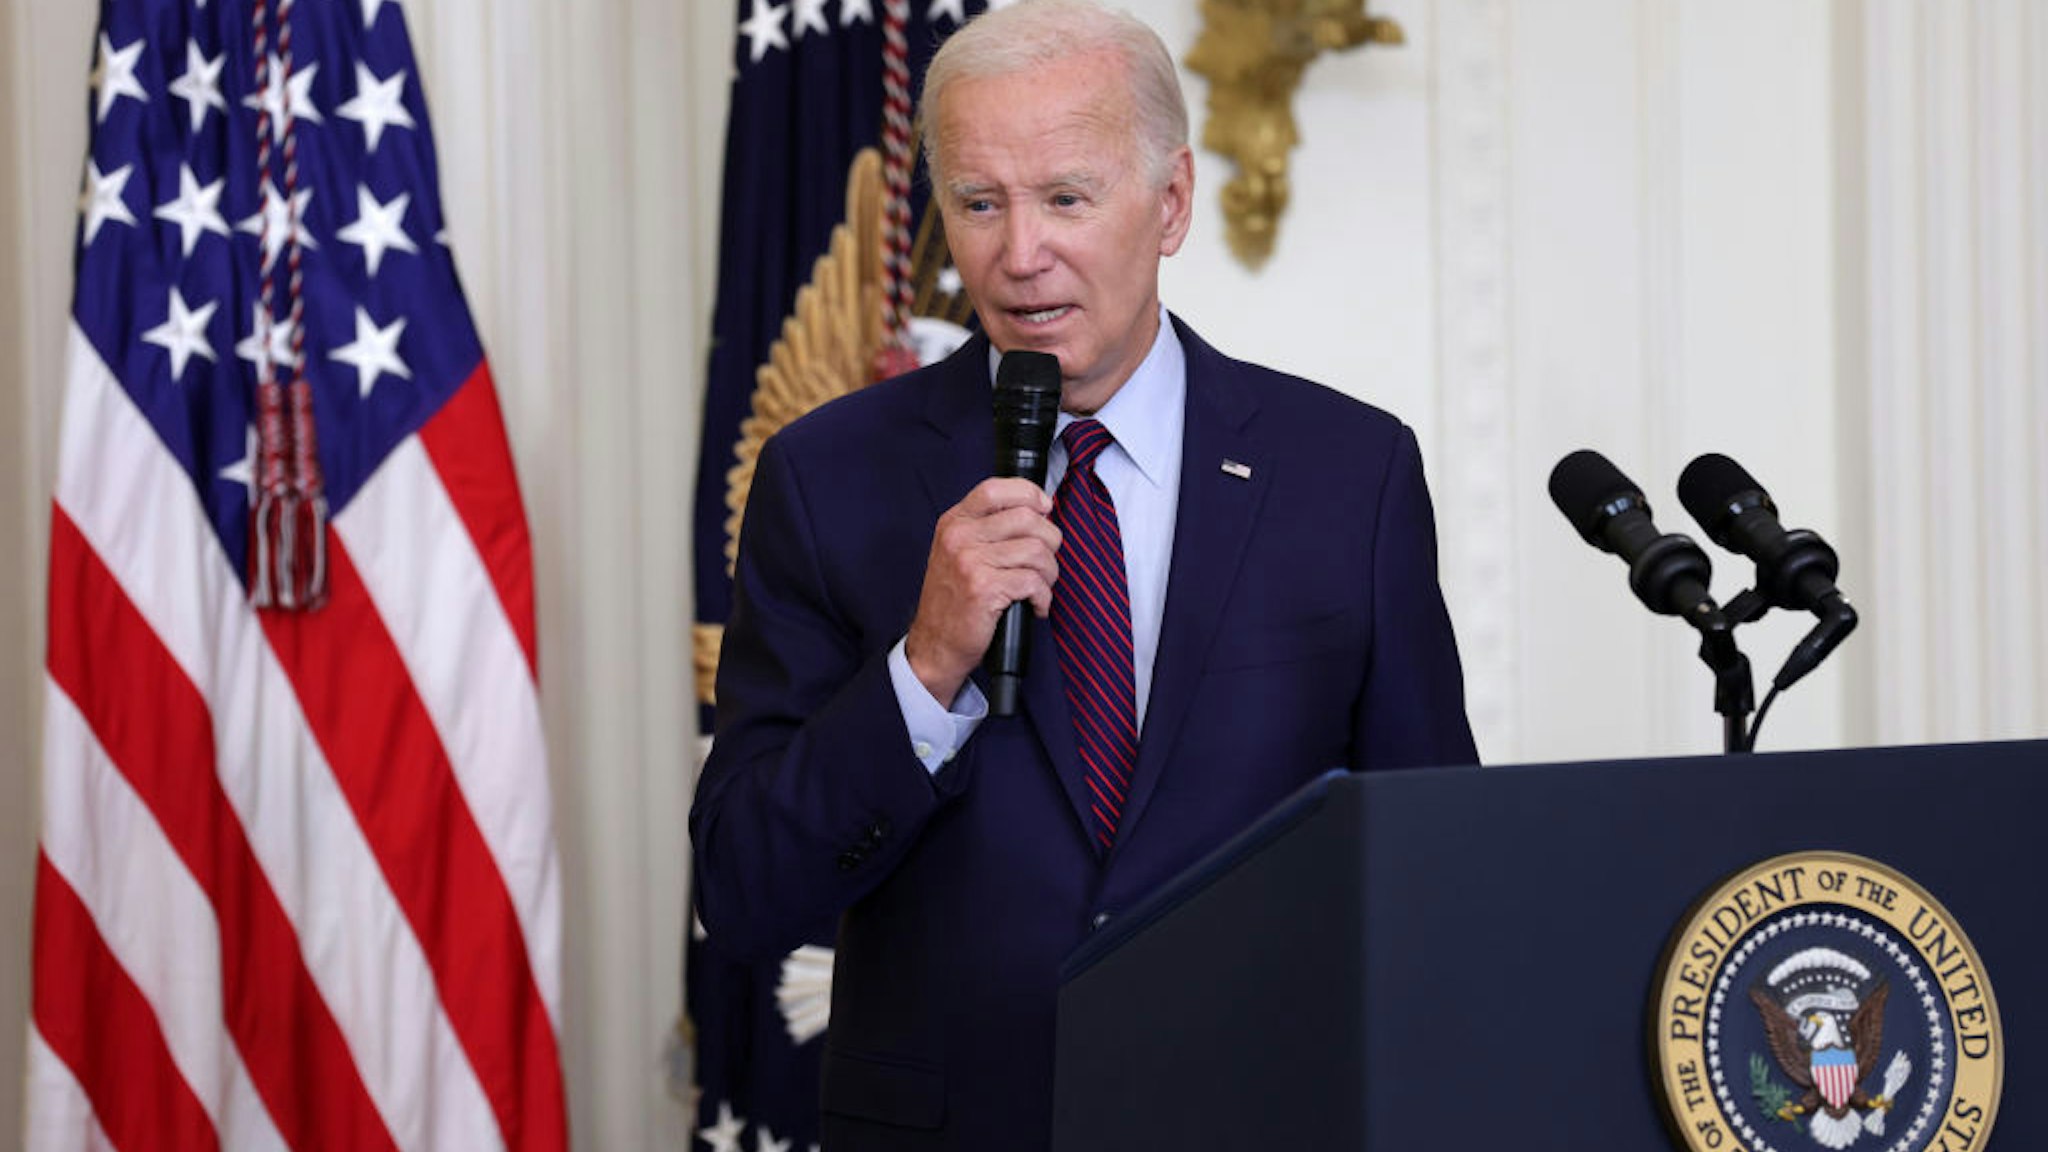 WASHINGTON, DC - AUGUST 28: U.S. President Joe Biden delivers remarks at an East Room reception at the White House on August 28, 2023 in Washington, DC. President Biden hosted a reception to commemorate the 60th Anniversary of the founding of the Lawyers’ Committee for Civil Rights Under Law. (Photo by Alex Wong/Getty Images)